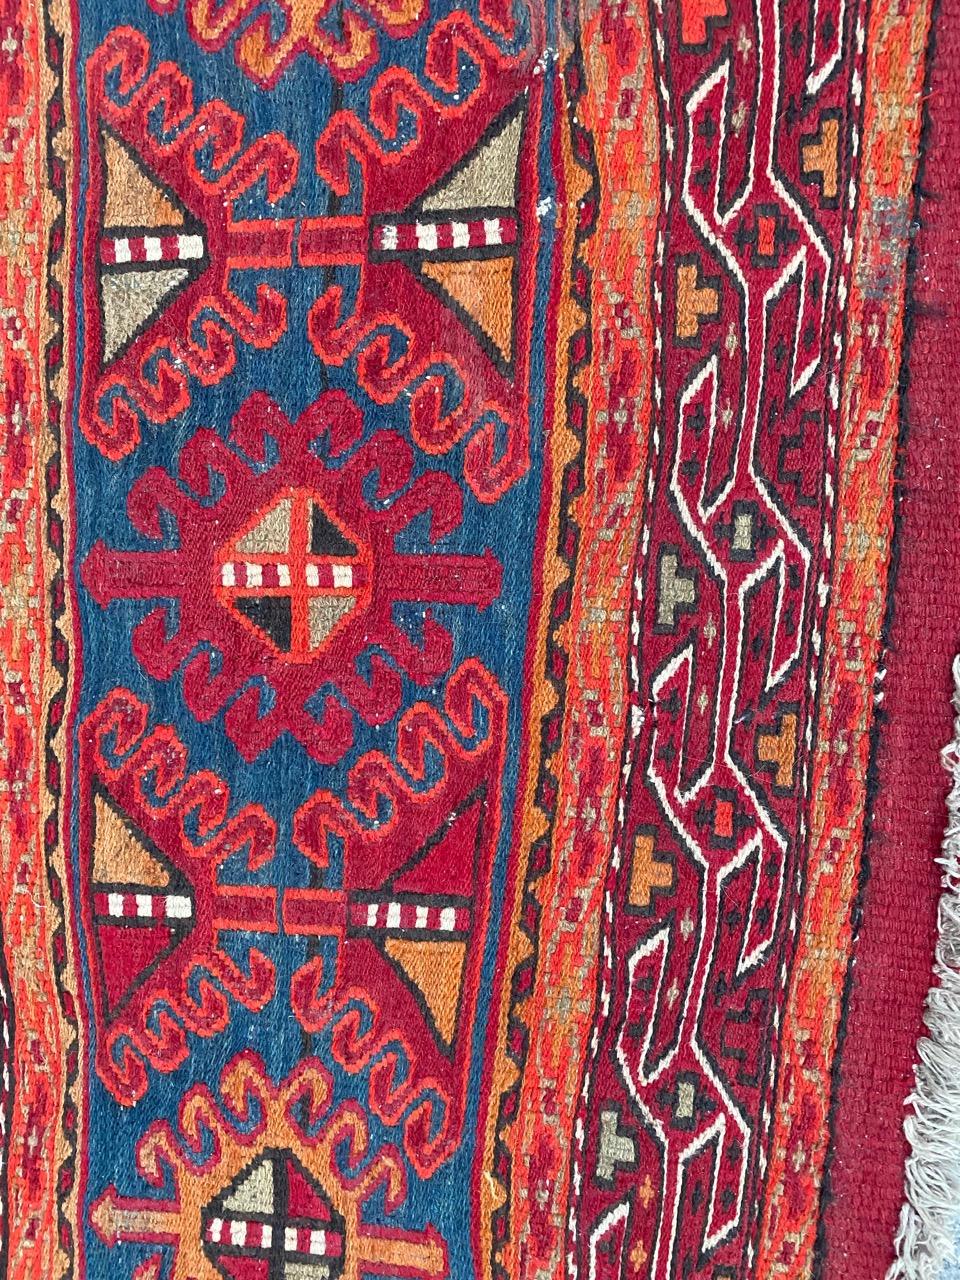 Beautiful mid century shahsavand Kilim with nice geometrical and tribal design and beautiful colors, entirely hand woven and embroidered with wool on cotton foundation.

✨✨✨
